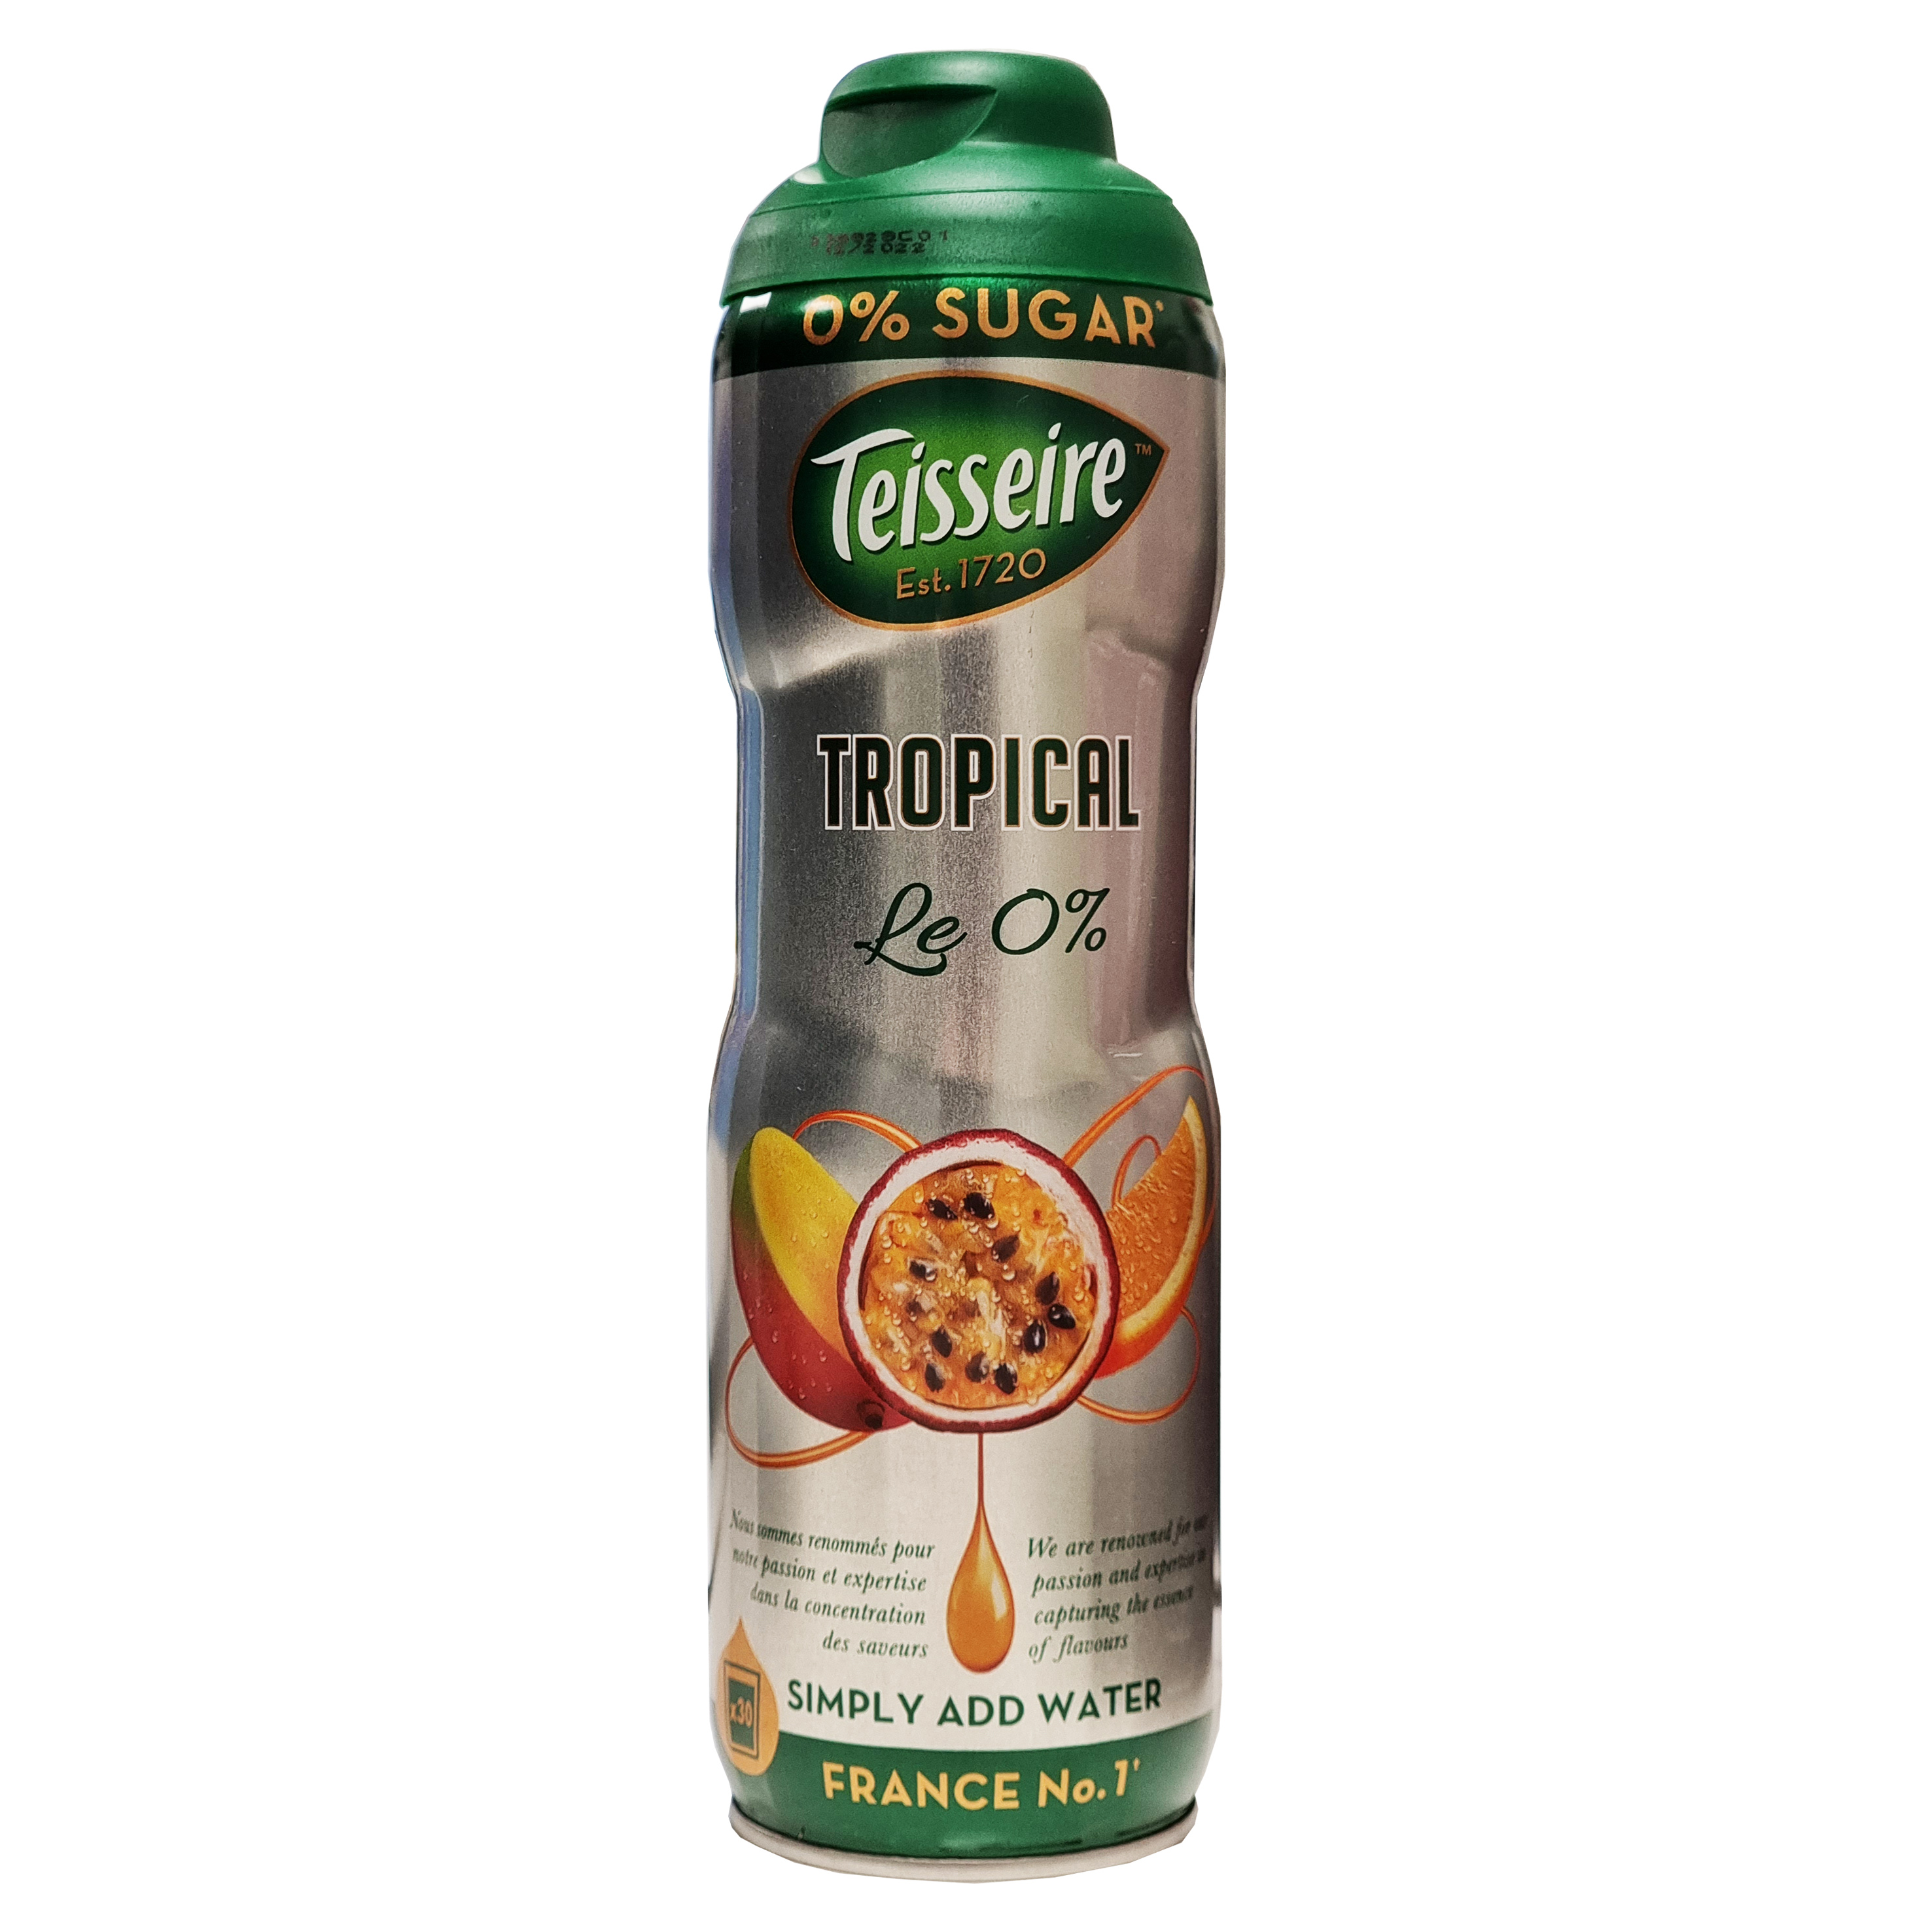 Teisseire sirop tropical 0% 60 cl.